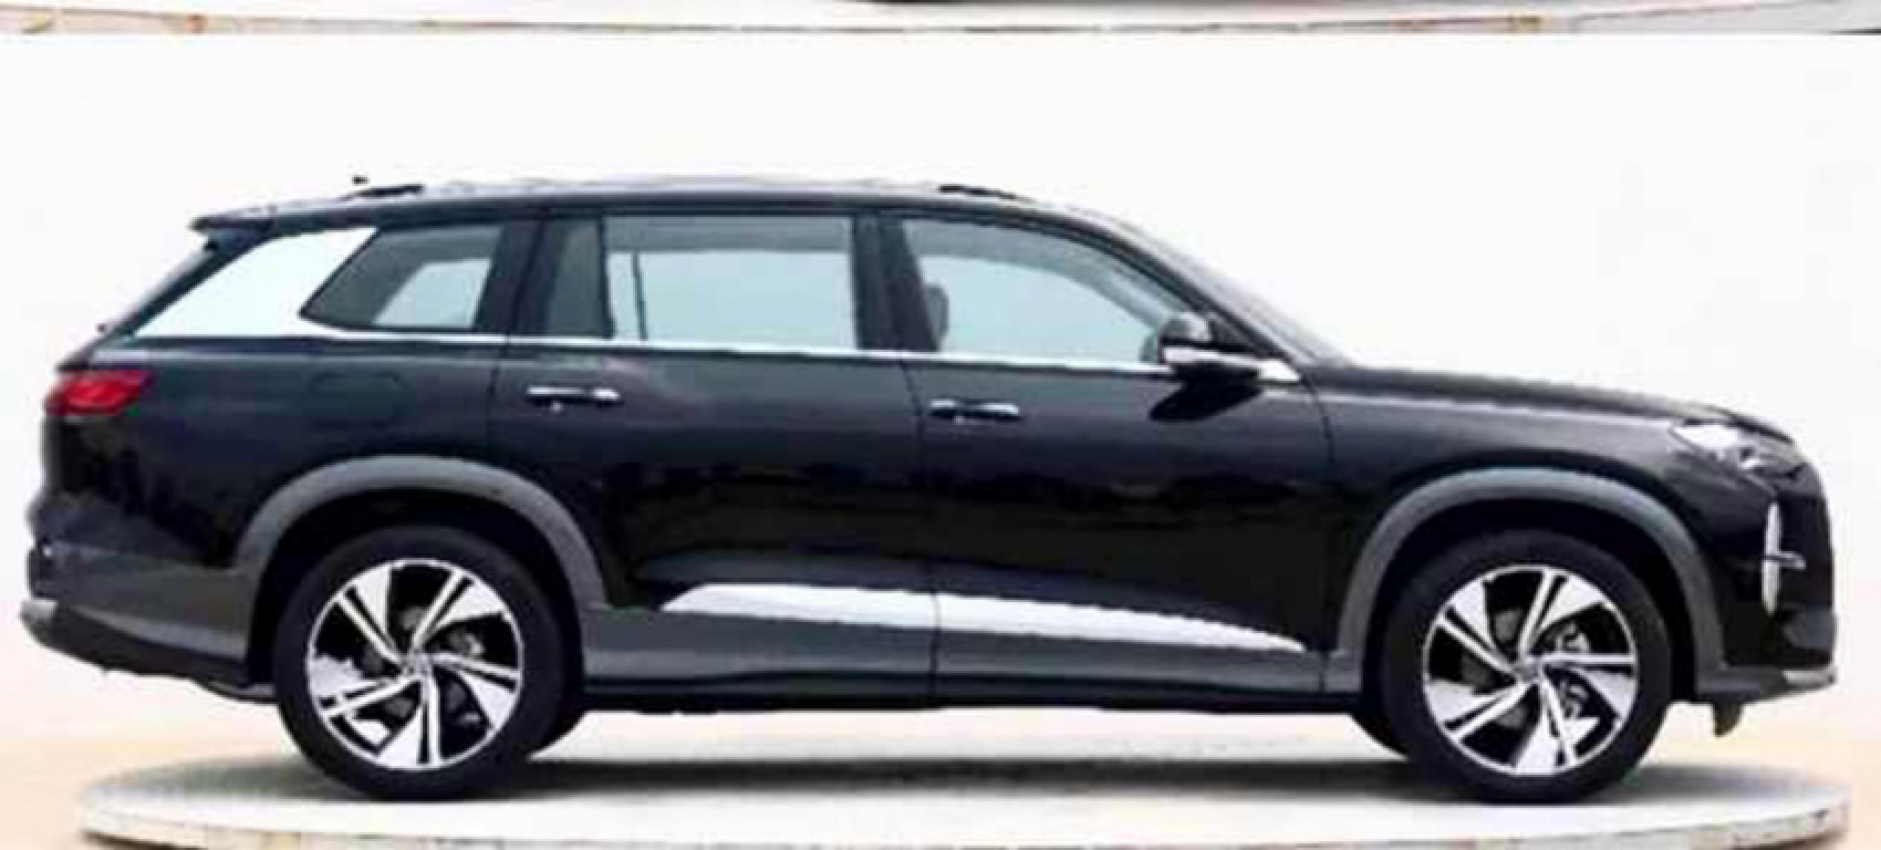 audi, autos, cars, vnex, biggest audi ever: q6 suv leaked, but it seems to be for china only